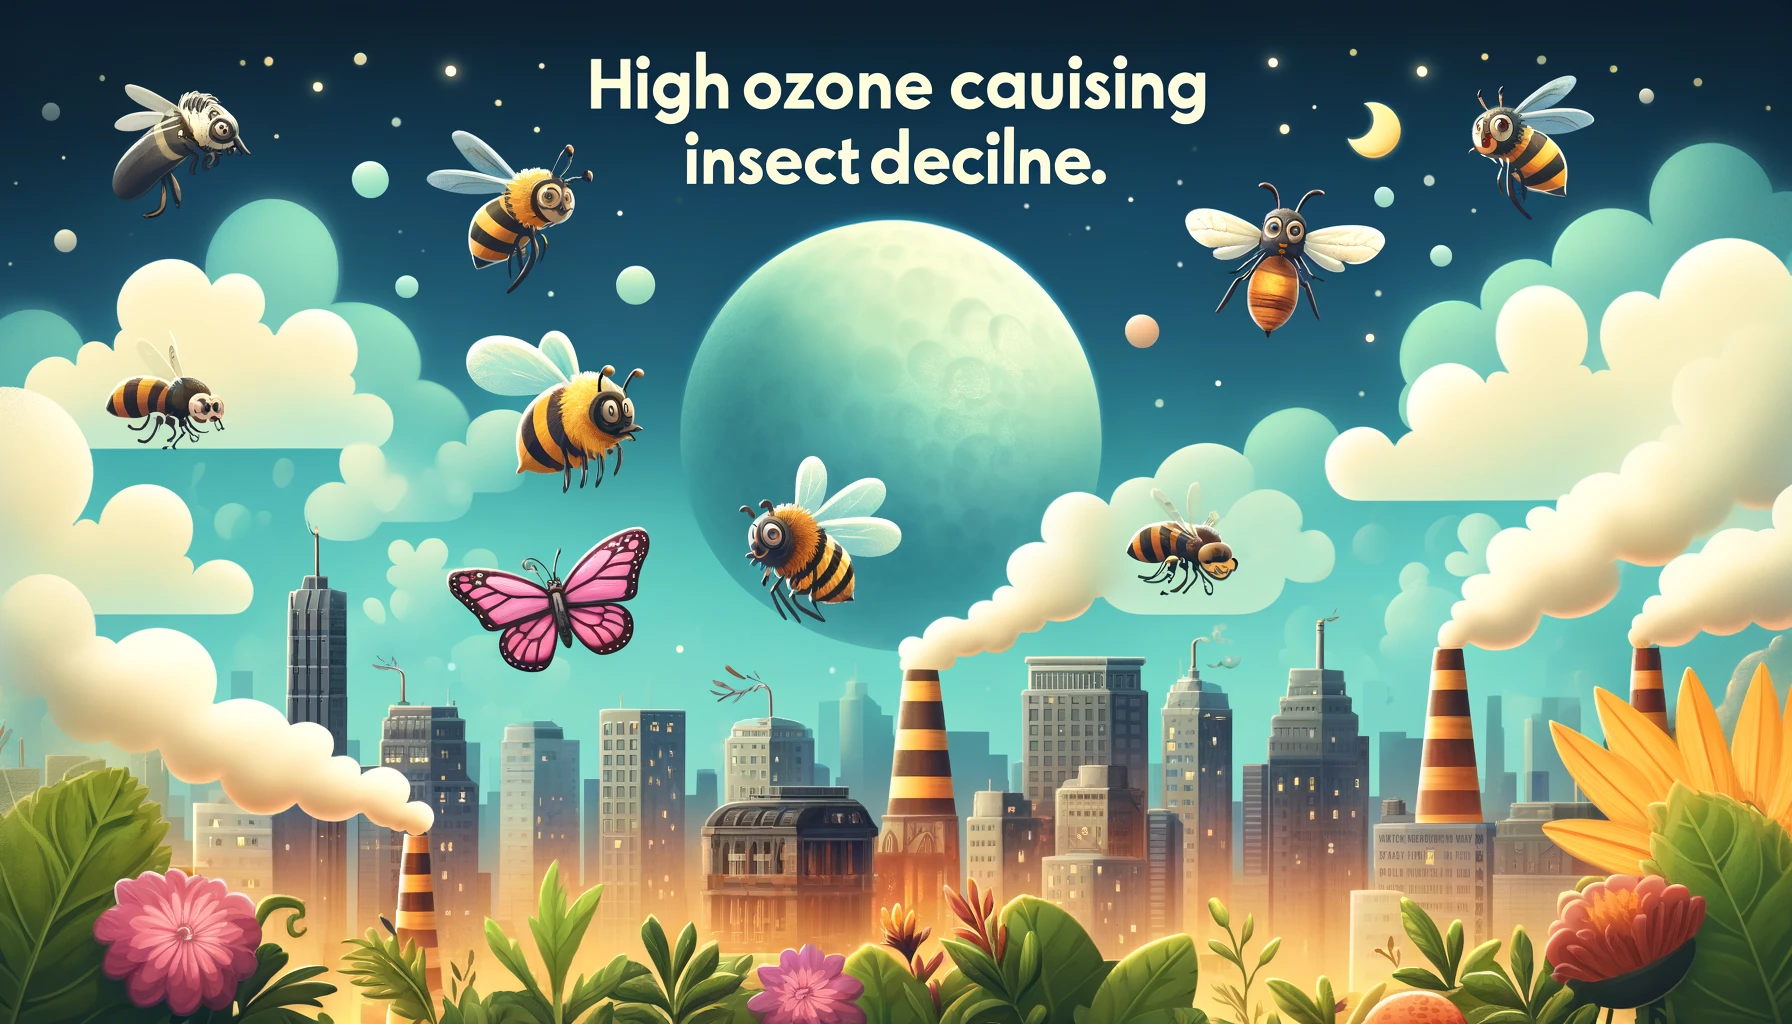 Study links high ozone levels to global insect decline